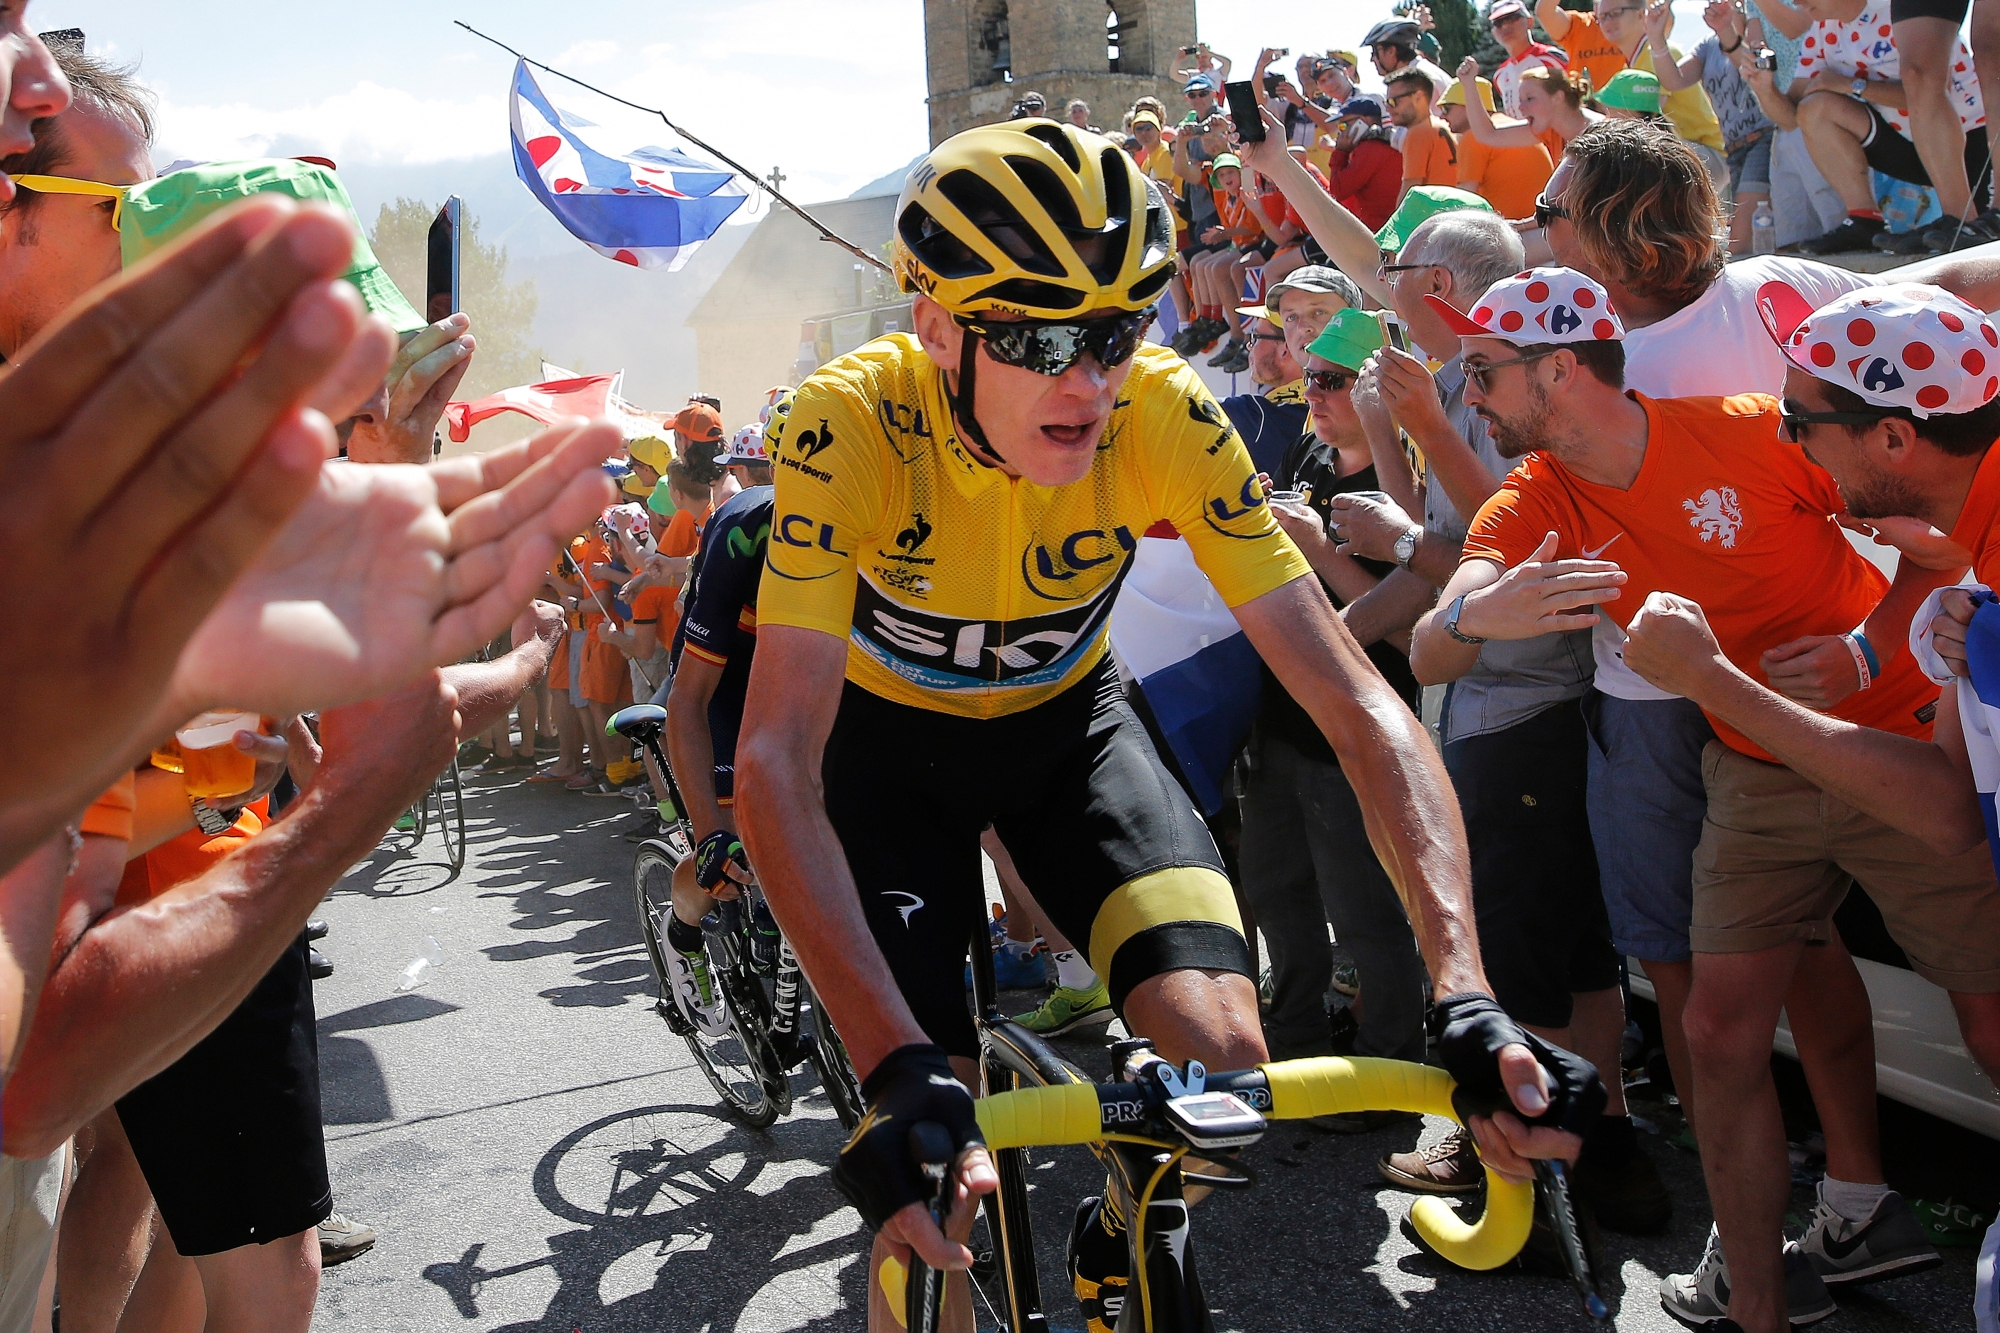 Britain's Chris Froome, wearing the overall leader's yellow jersey, climbs towards Alpe d'Huez during the twentieth stage of the Tour de France cycling race over 110.5 kilometers (68.7 miles) with start in Modane and finish in Alpe d'Huez, France, Saturday, July 25, 2015. (AP Photo/Laurent Cipriani)d RAD TOUR DE FRANCE 2015